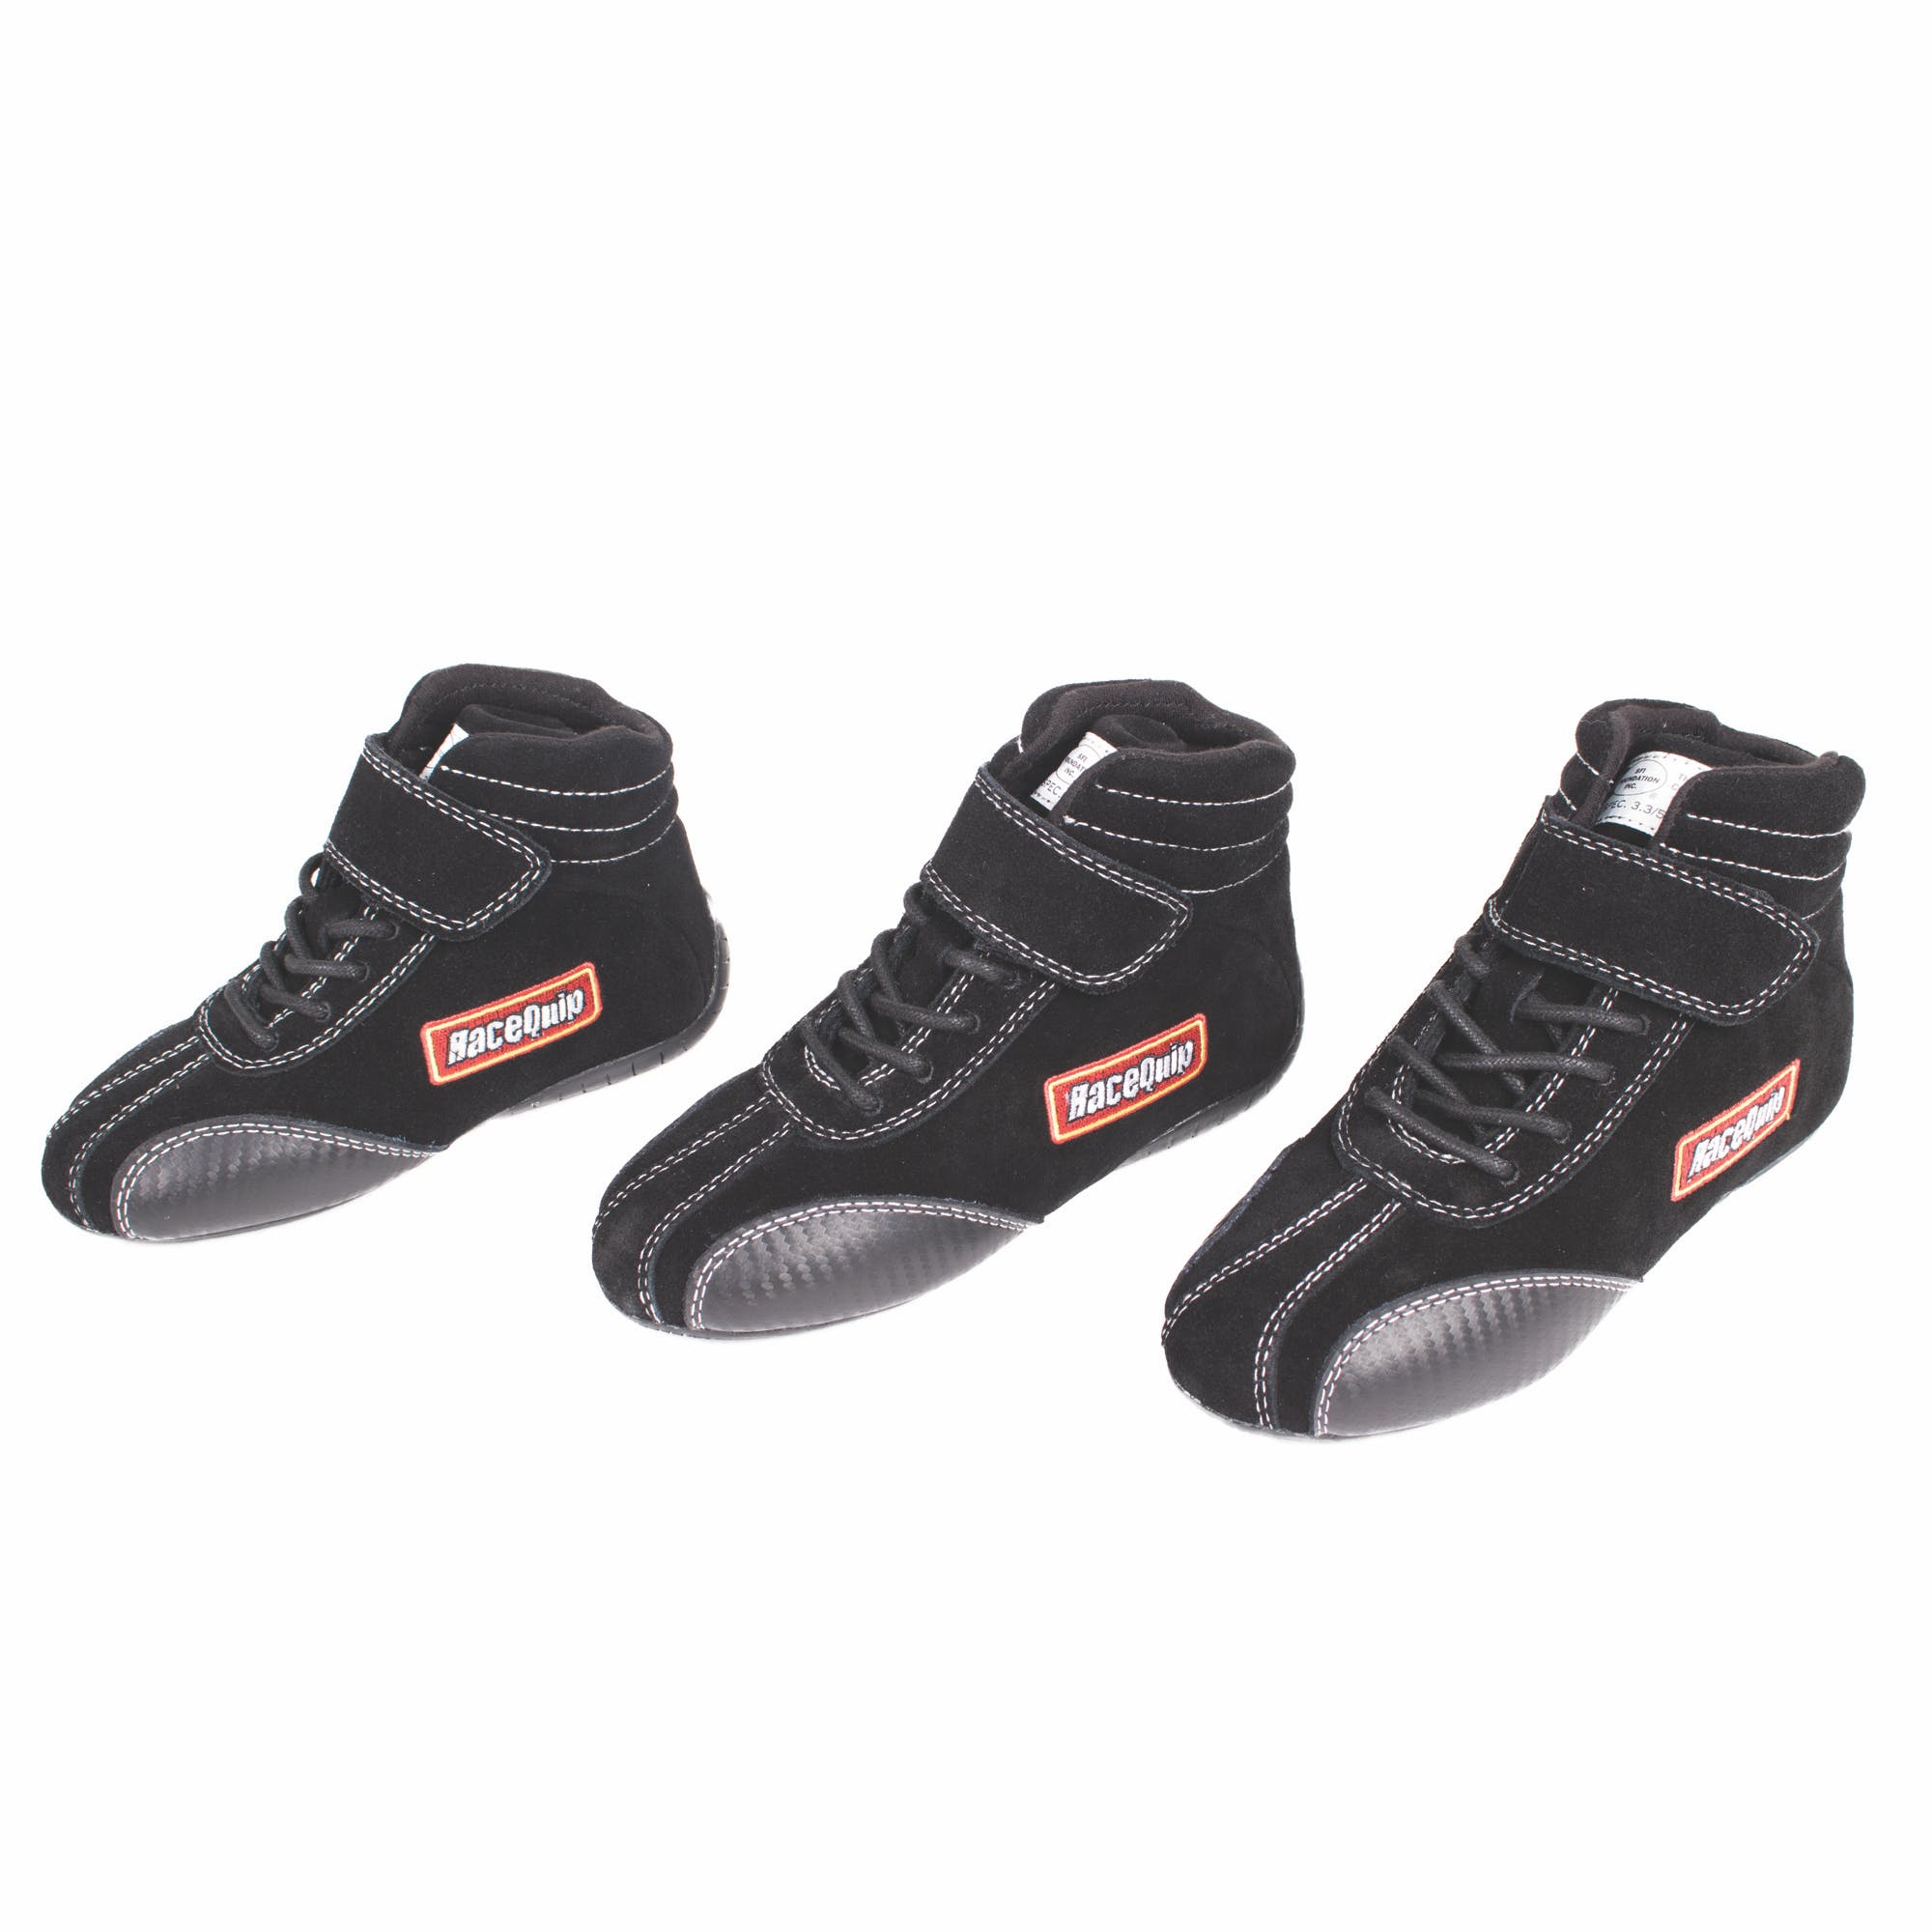 RaceQuip 30400912 Euro Carbon-L Series Race Shoes SFI 3.3/ 5 Certified; Black Youth Size 12